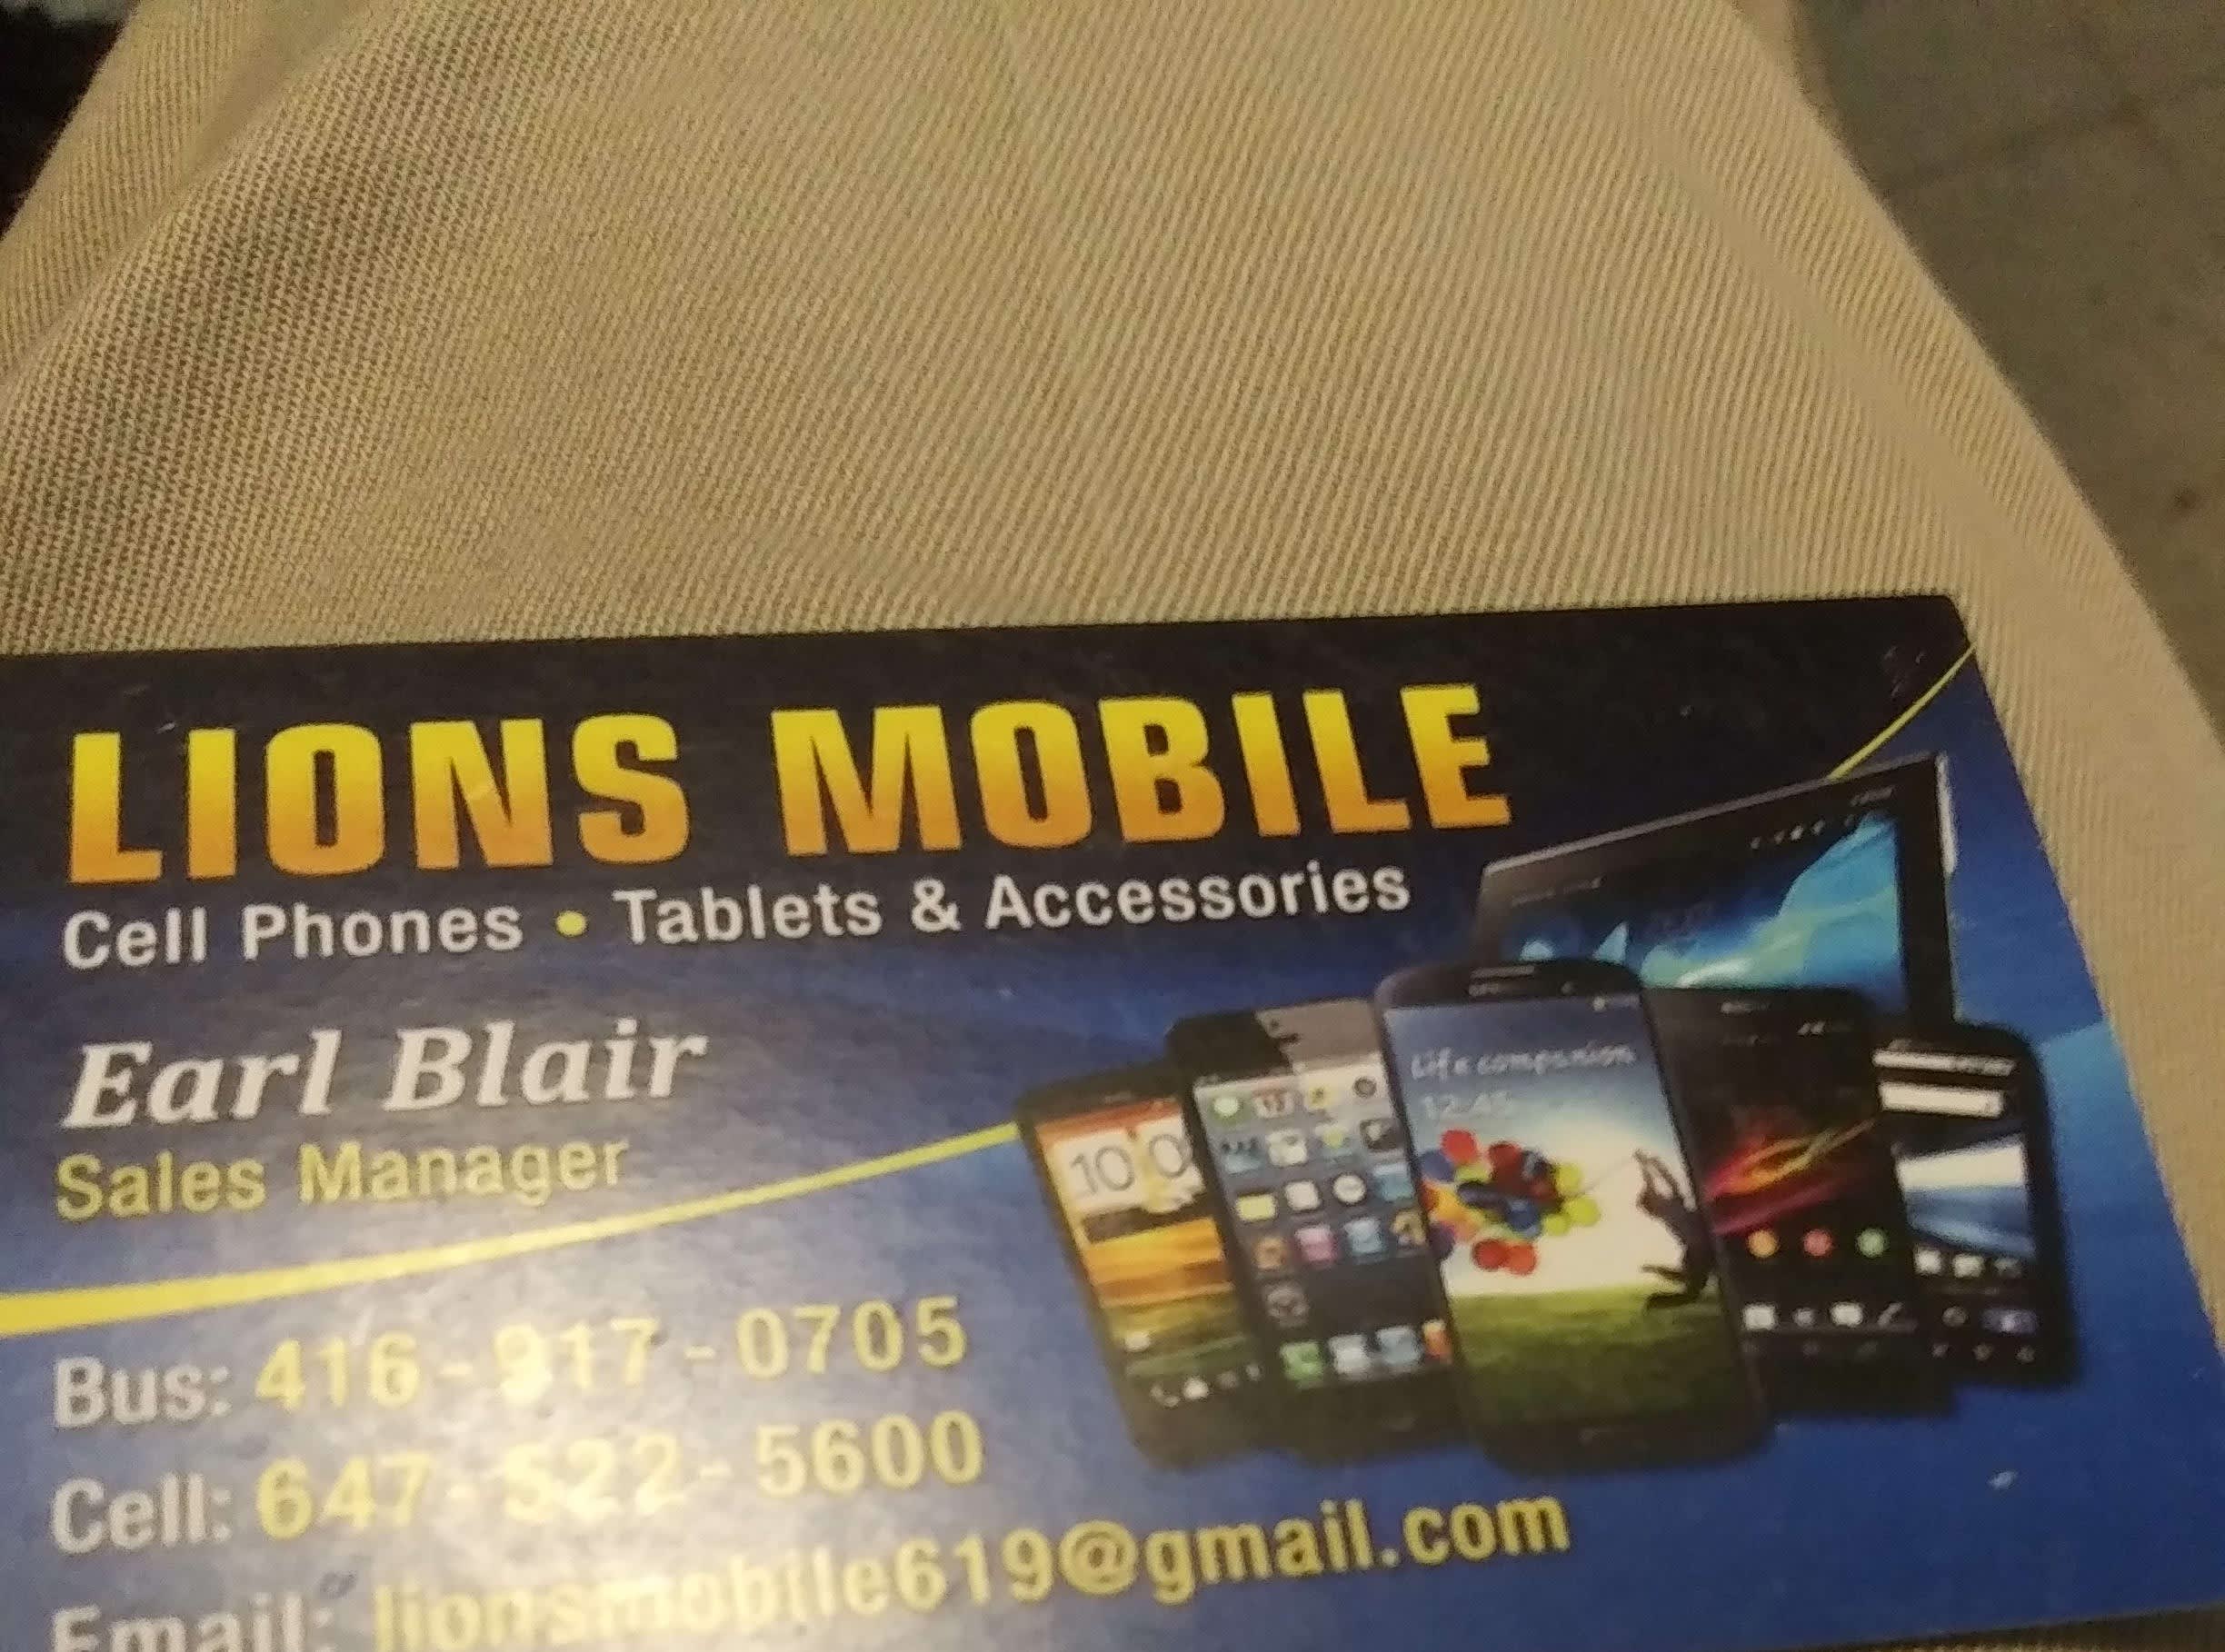 Lions Mobile